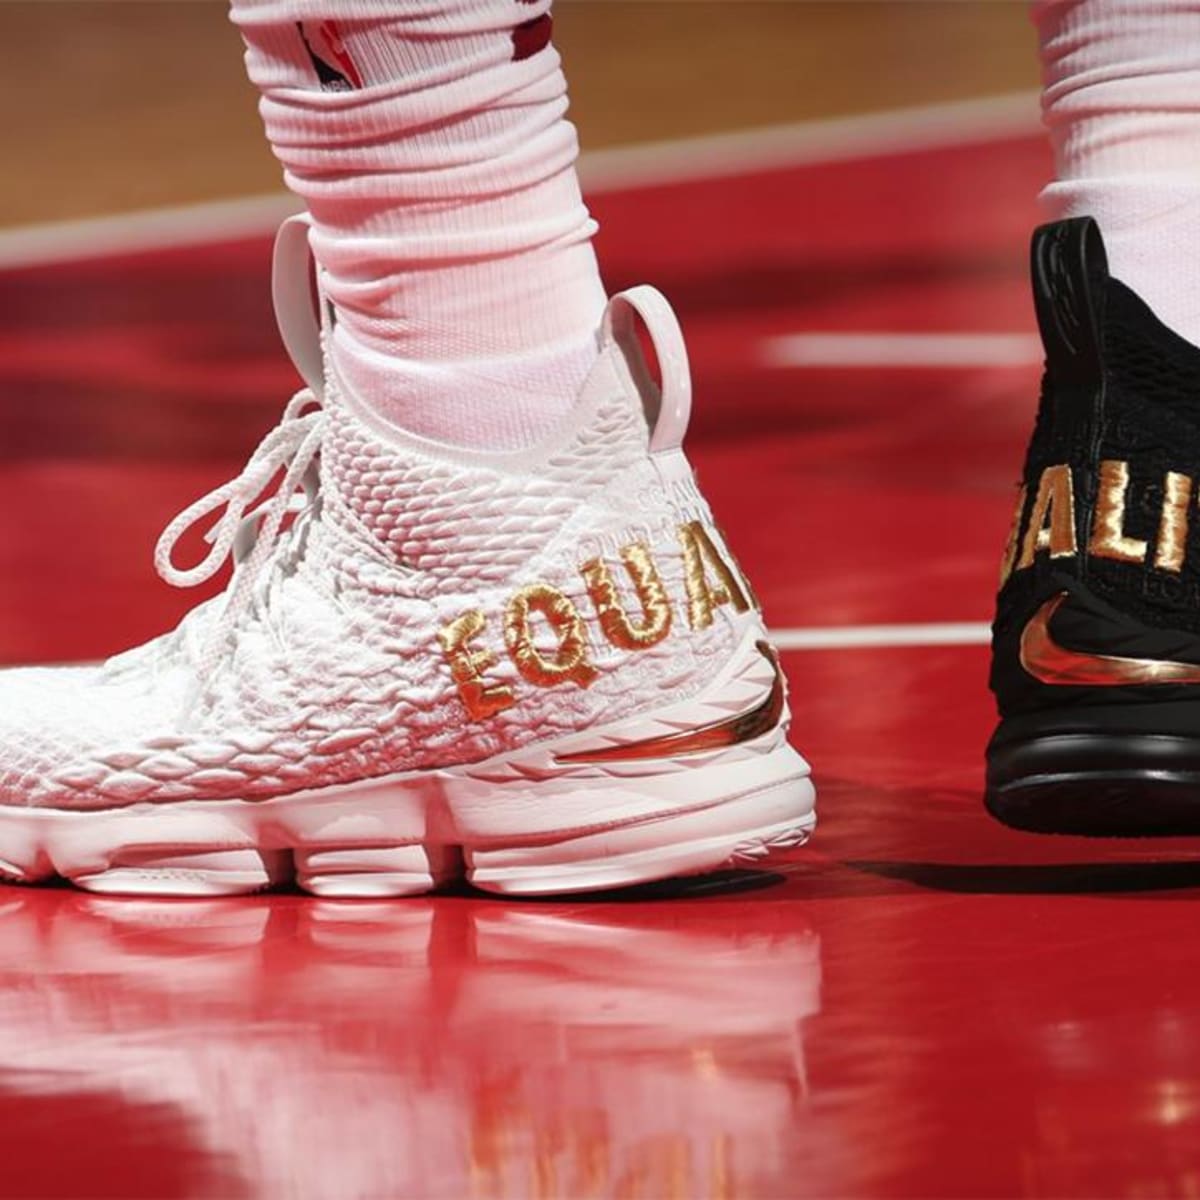 30 most ridiculously expensive LeBron James sneakers  clevelandcom